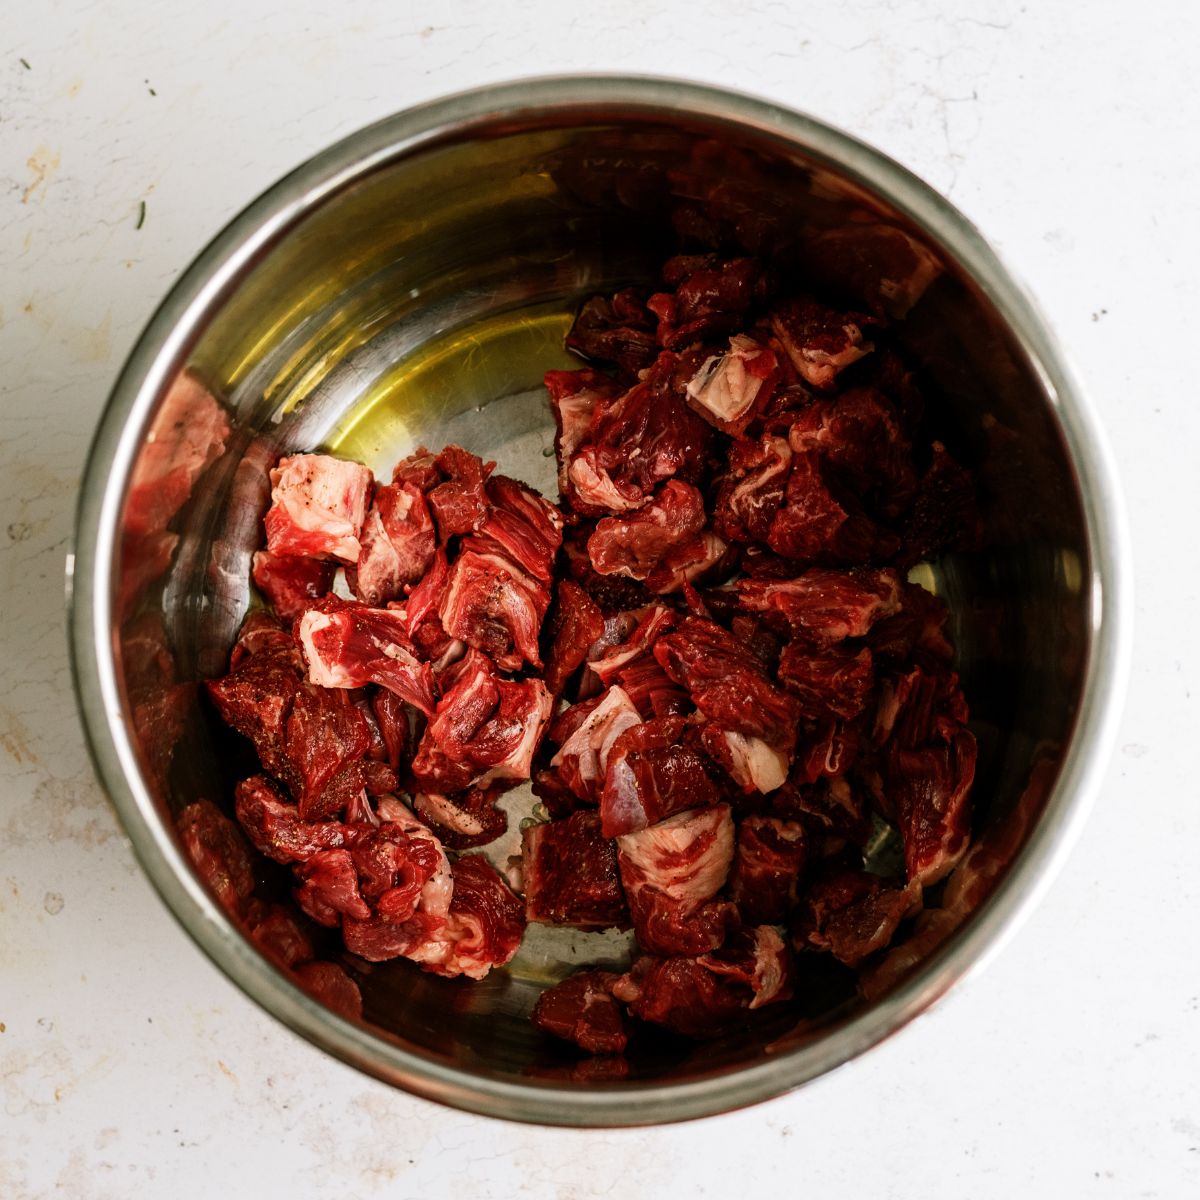 Searing beef cubes in Instant Pot